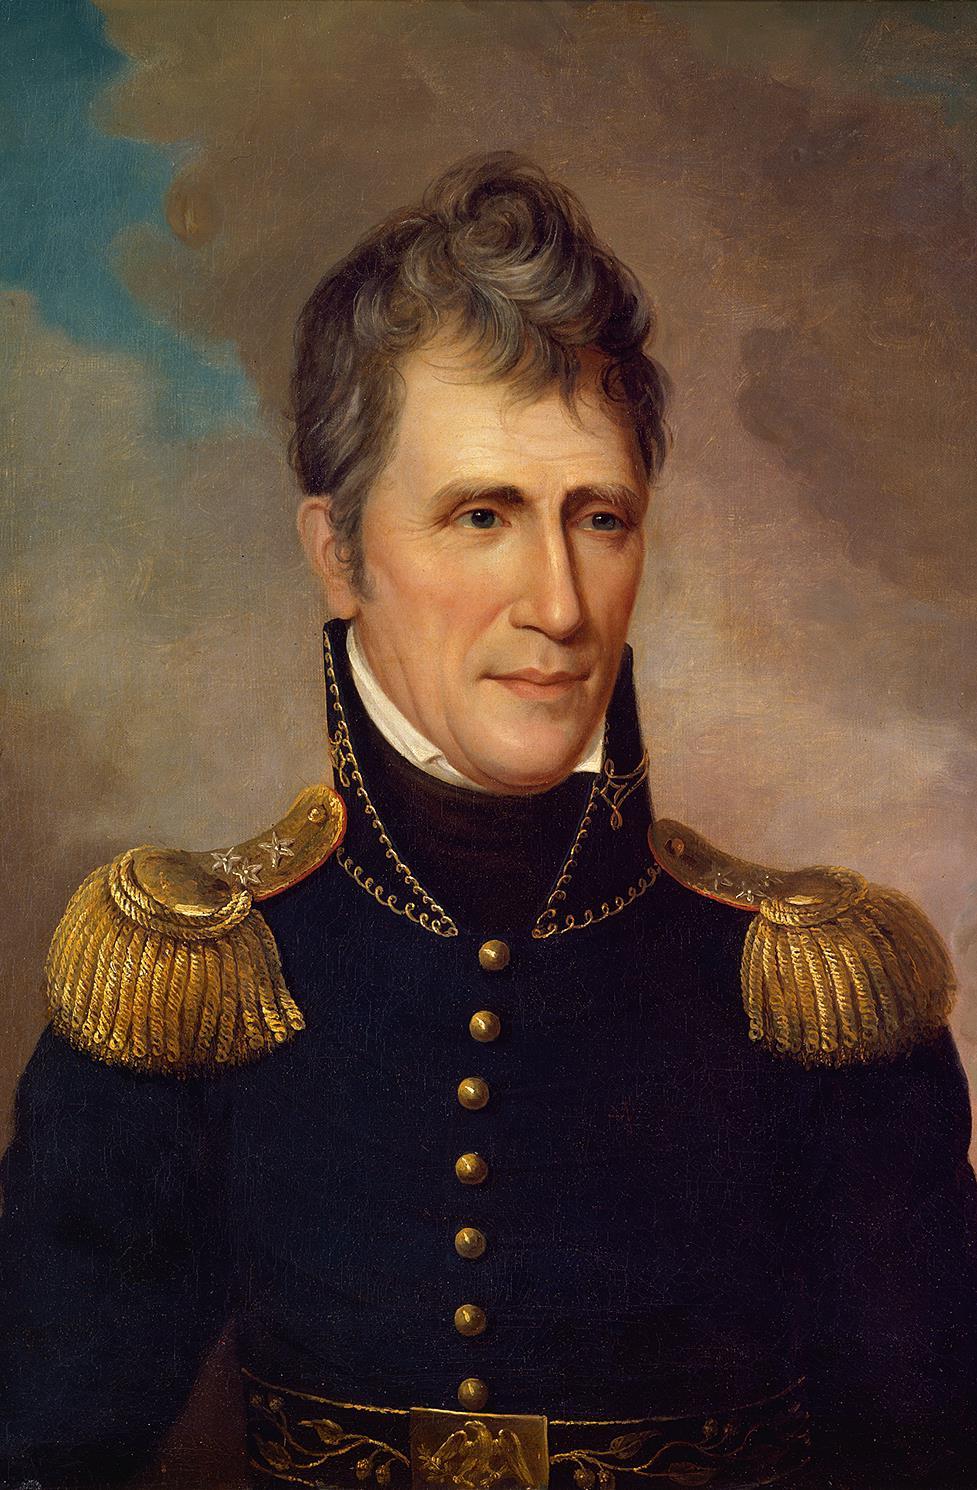 Andrew Jackson a. Nicknamed Old Hickory for his toughness b. Major General during the War of 1812 c.